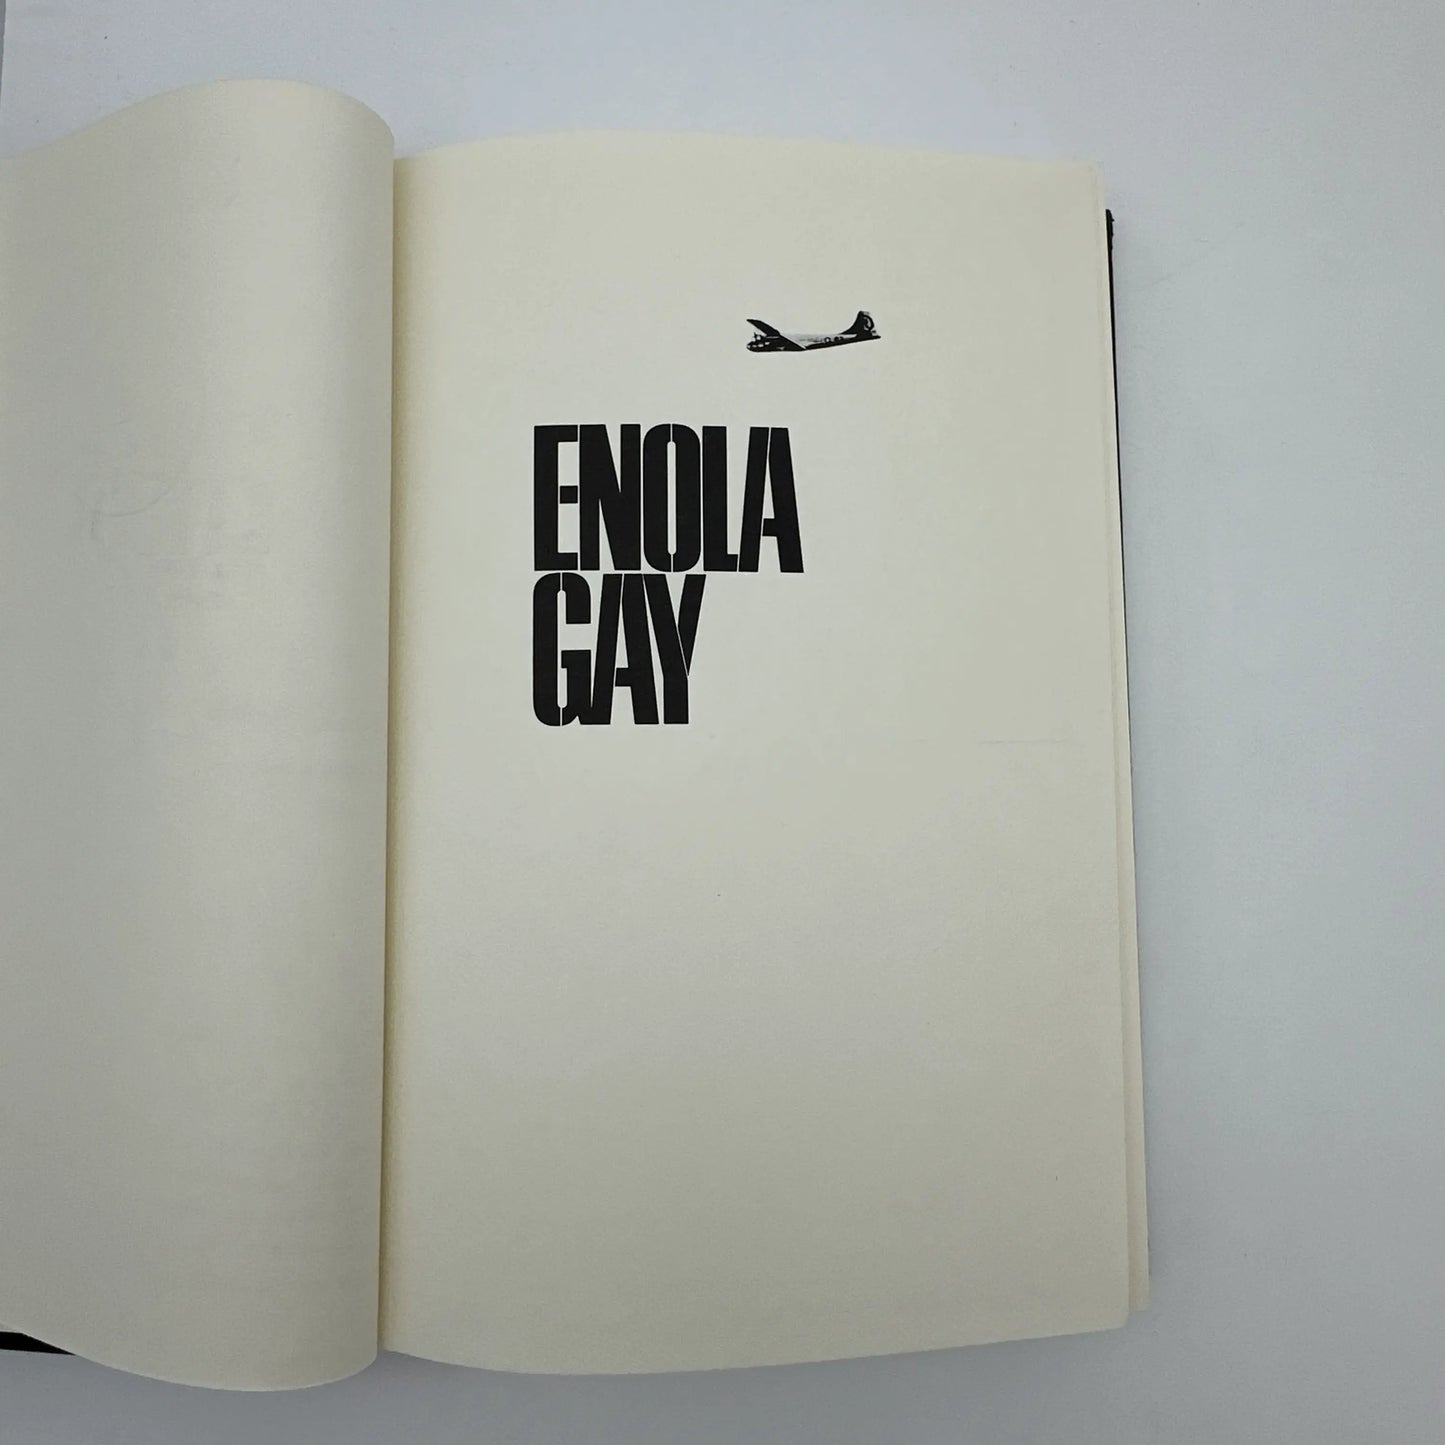 Book on the Enola Gay with a hand-drawn diagram signed by the navigator, Dutch Van Kirk